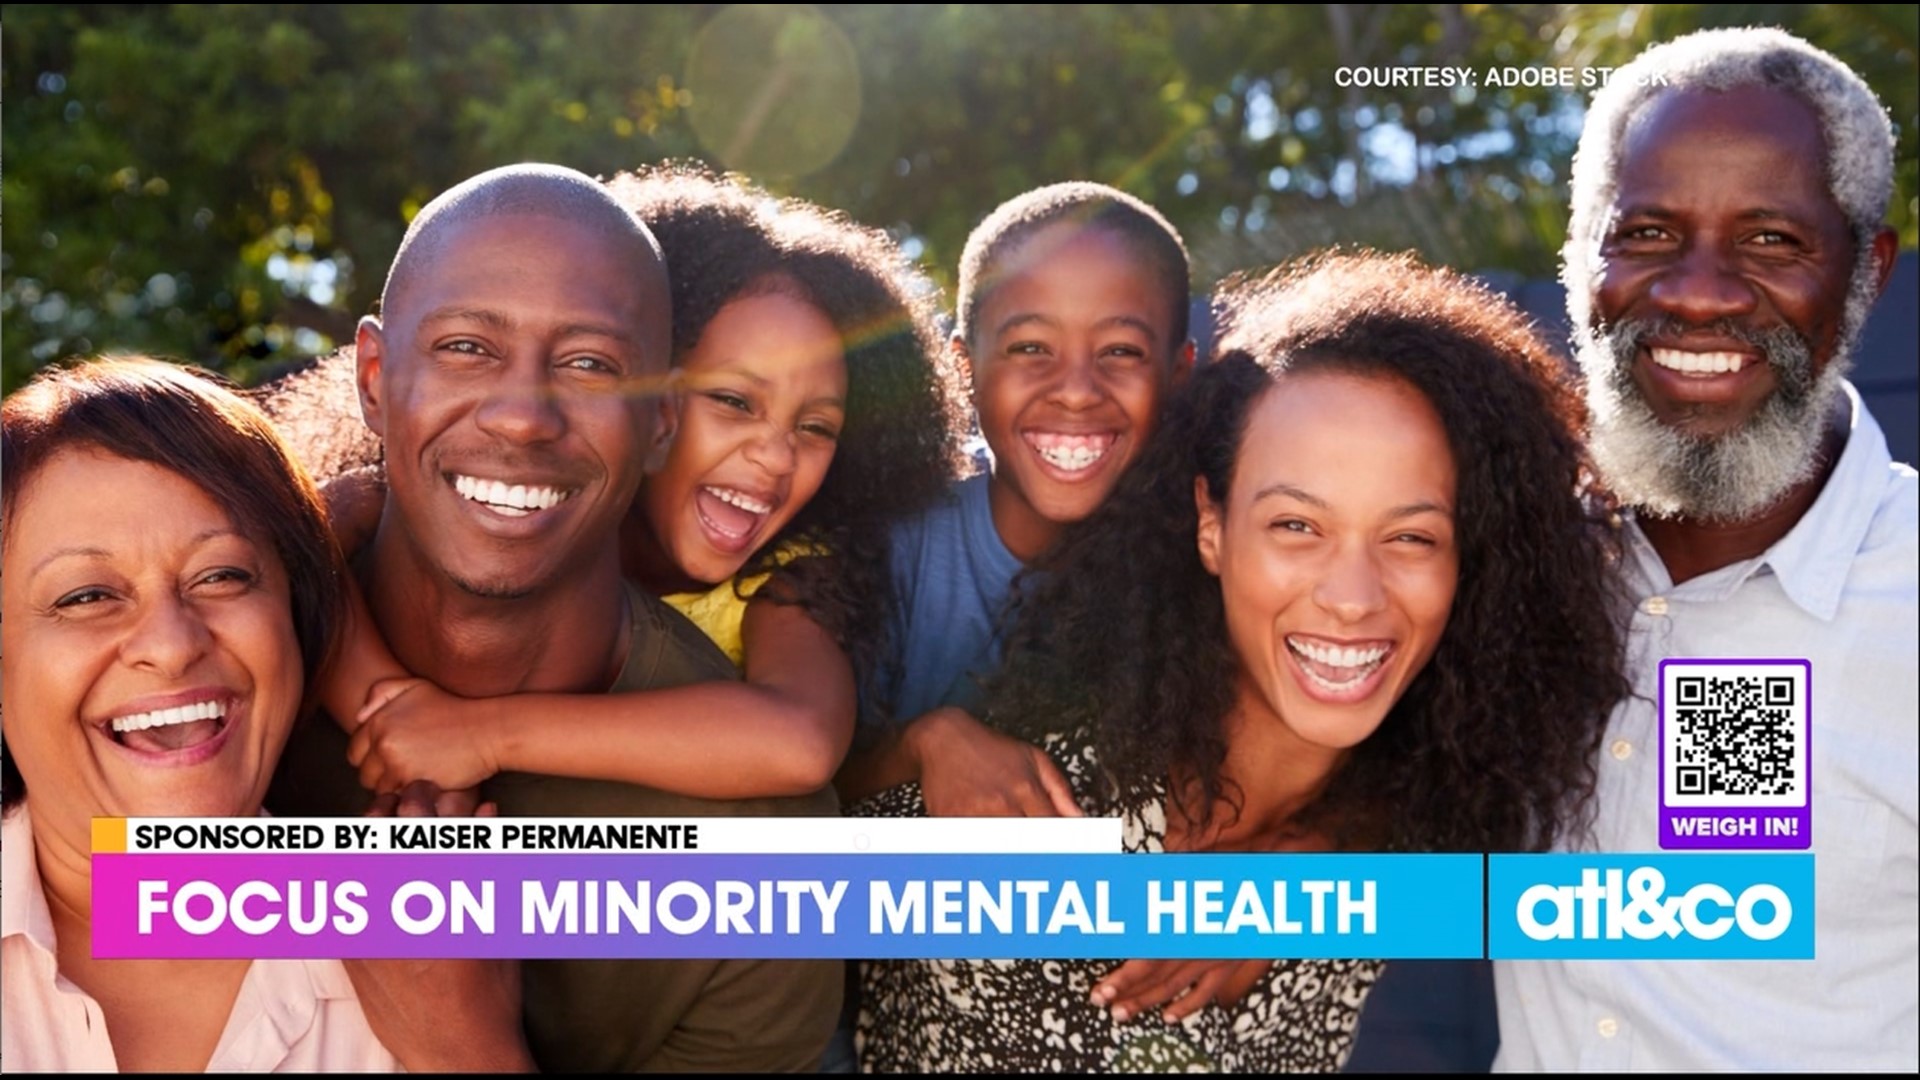 Psychiatrist Dr. Lateefah Watford from Kaiser Permanente shares the importance of minority mental health and treatment for underserved populations.